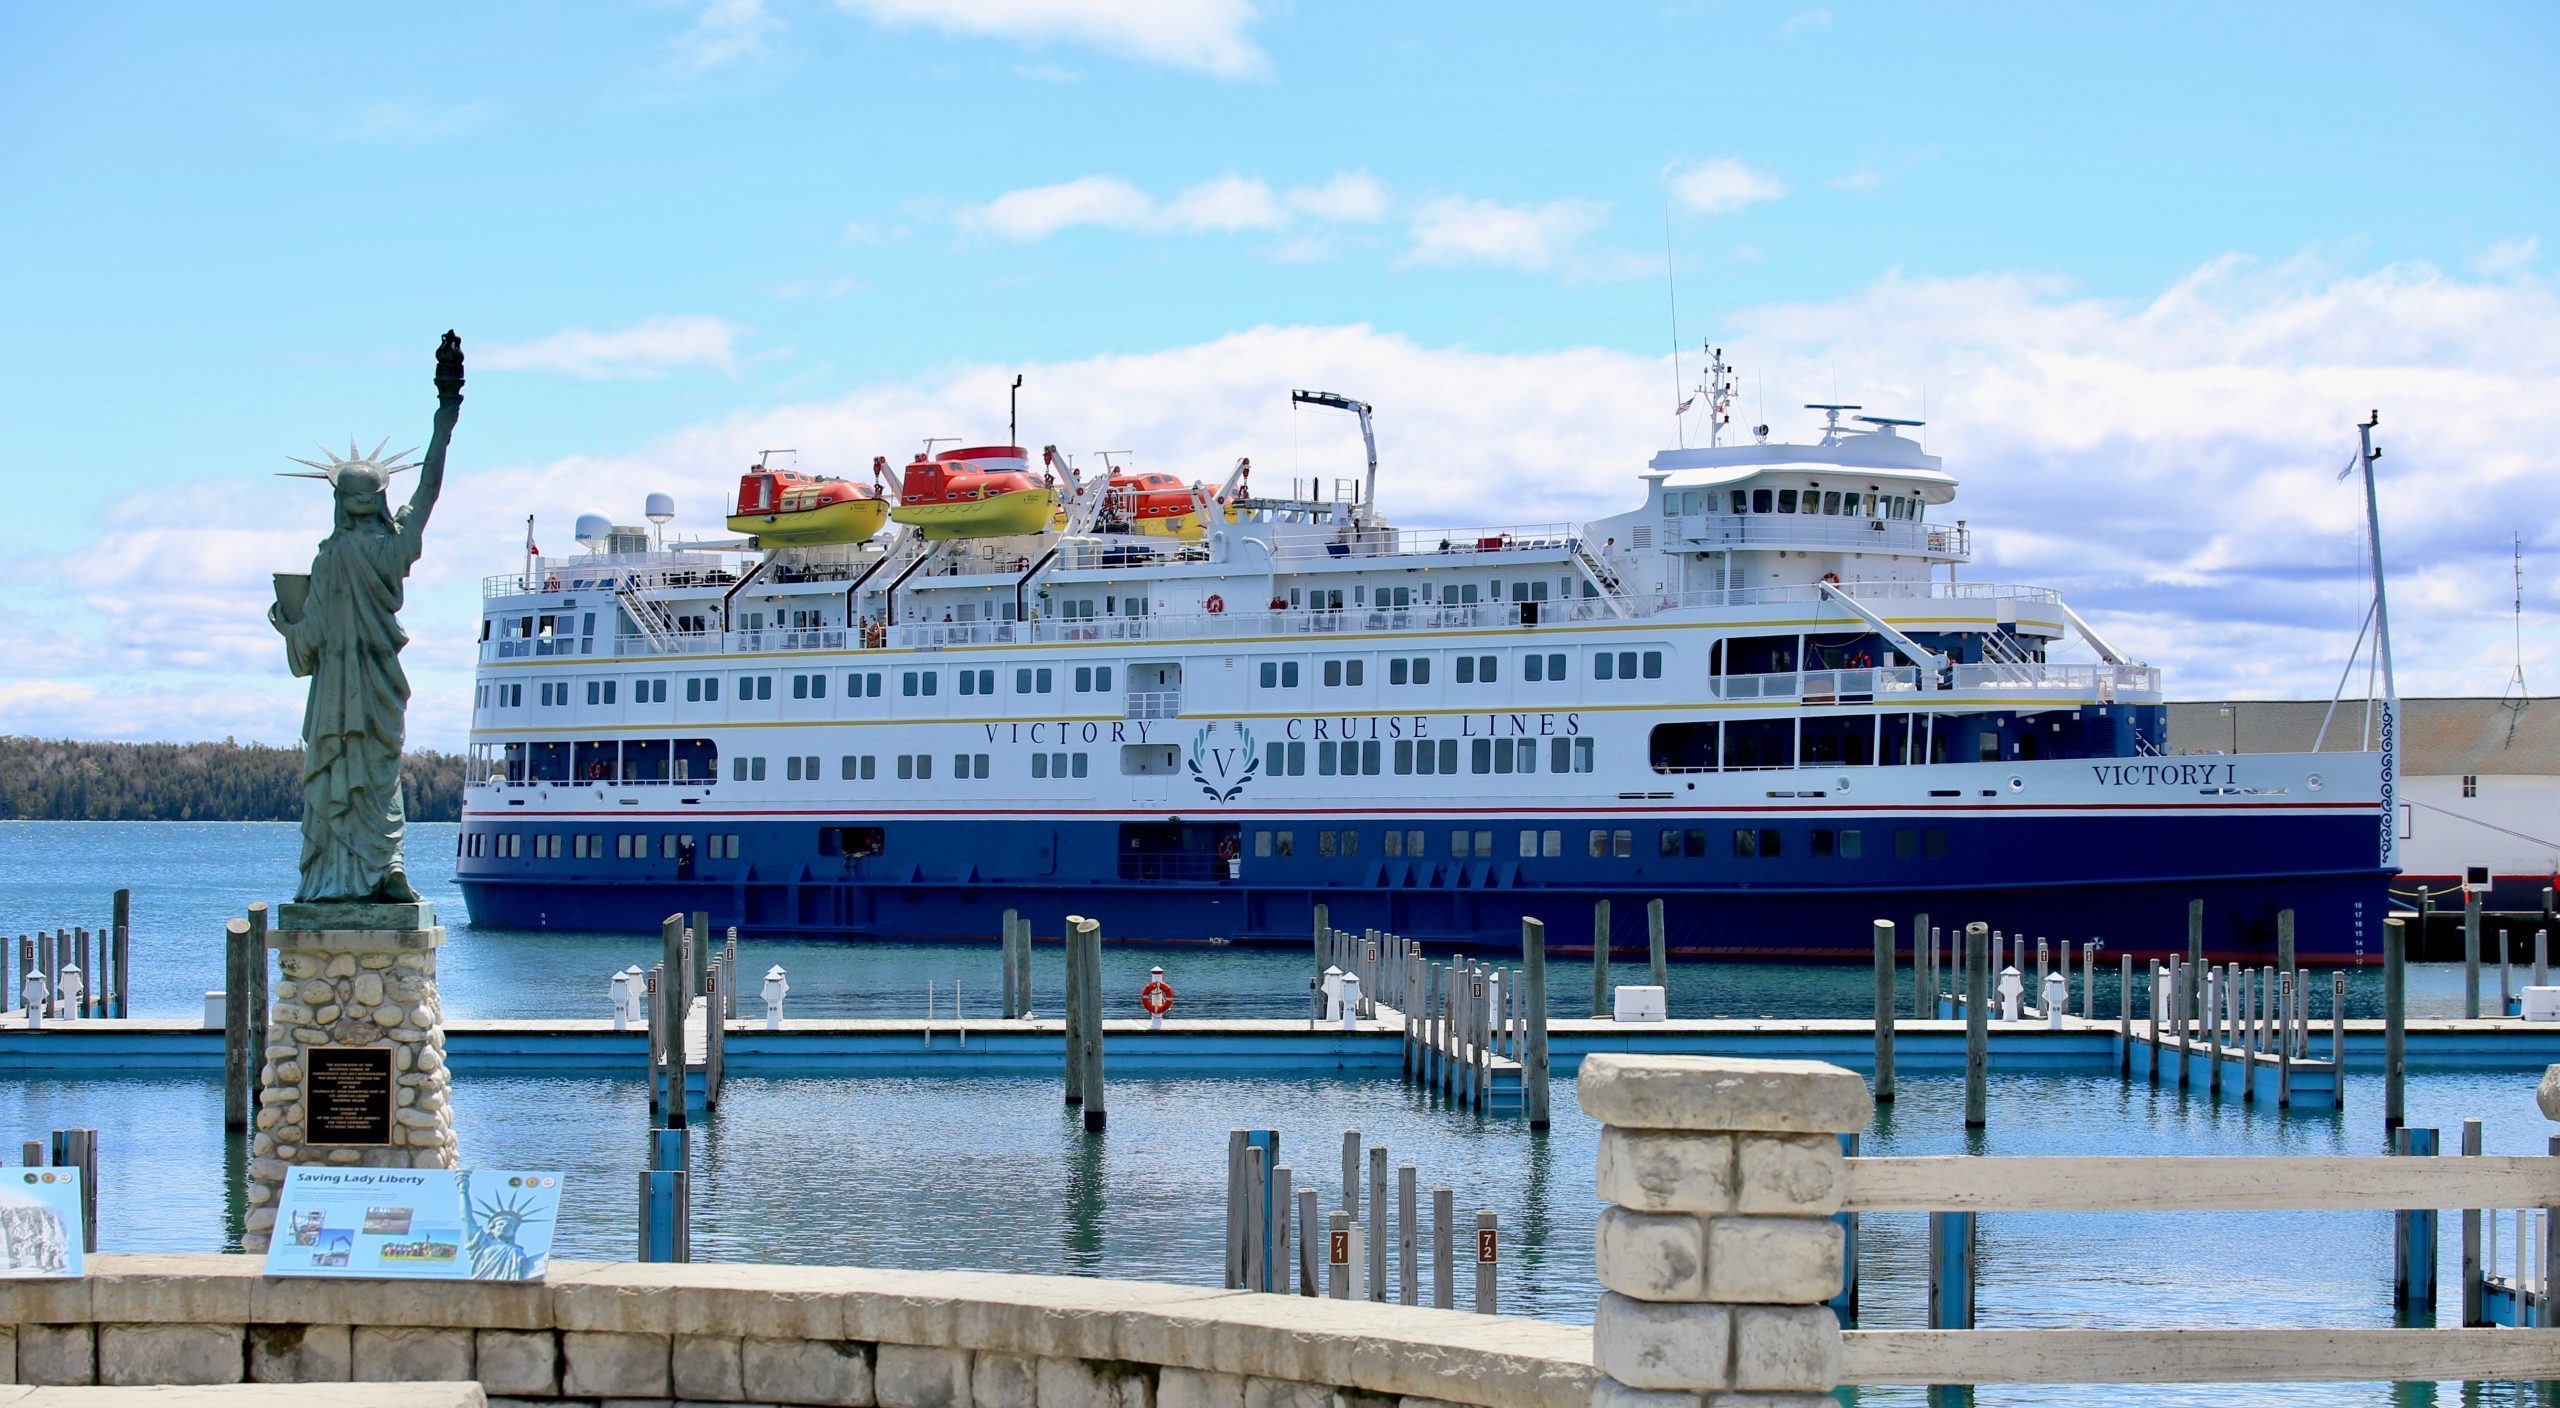 A large Great Lakes cruise ship docks on Mackinac Island with a replica Statue of Liberty in the foreground overlooking the marina